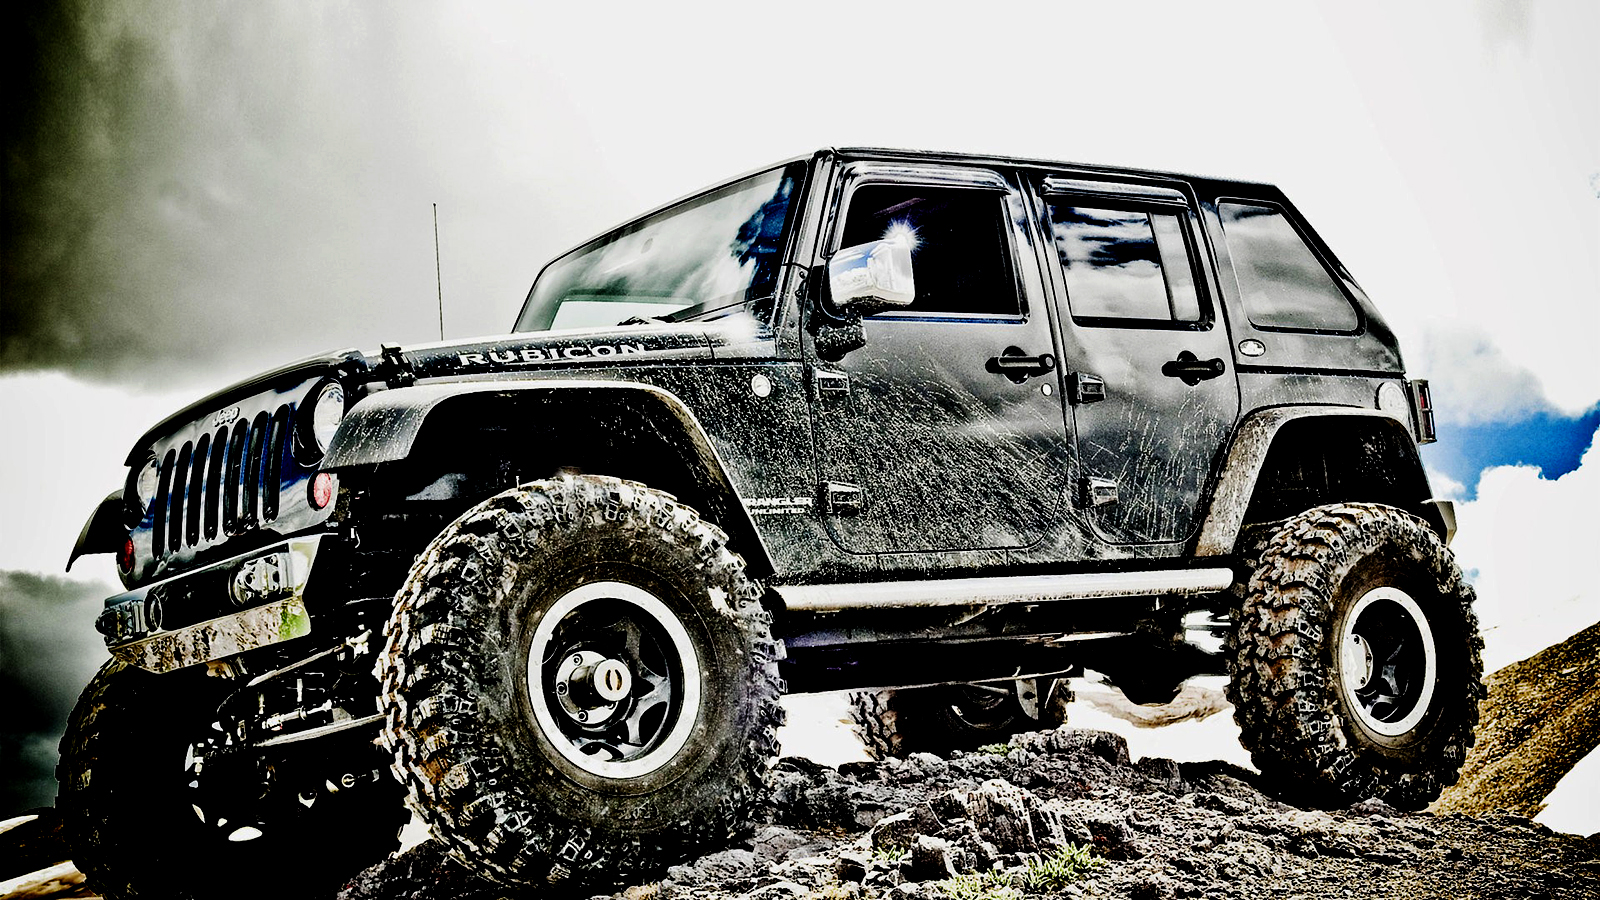 trololo blogg: Jeep Wallpaper For Android